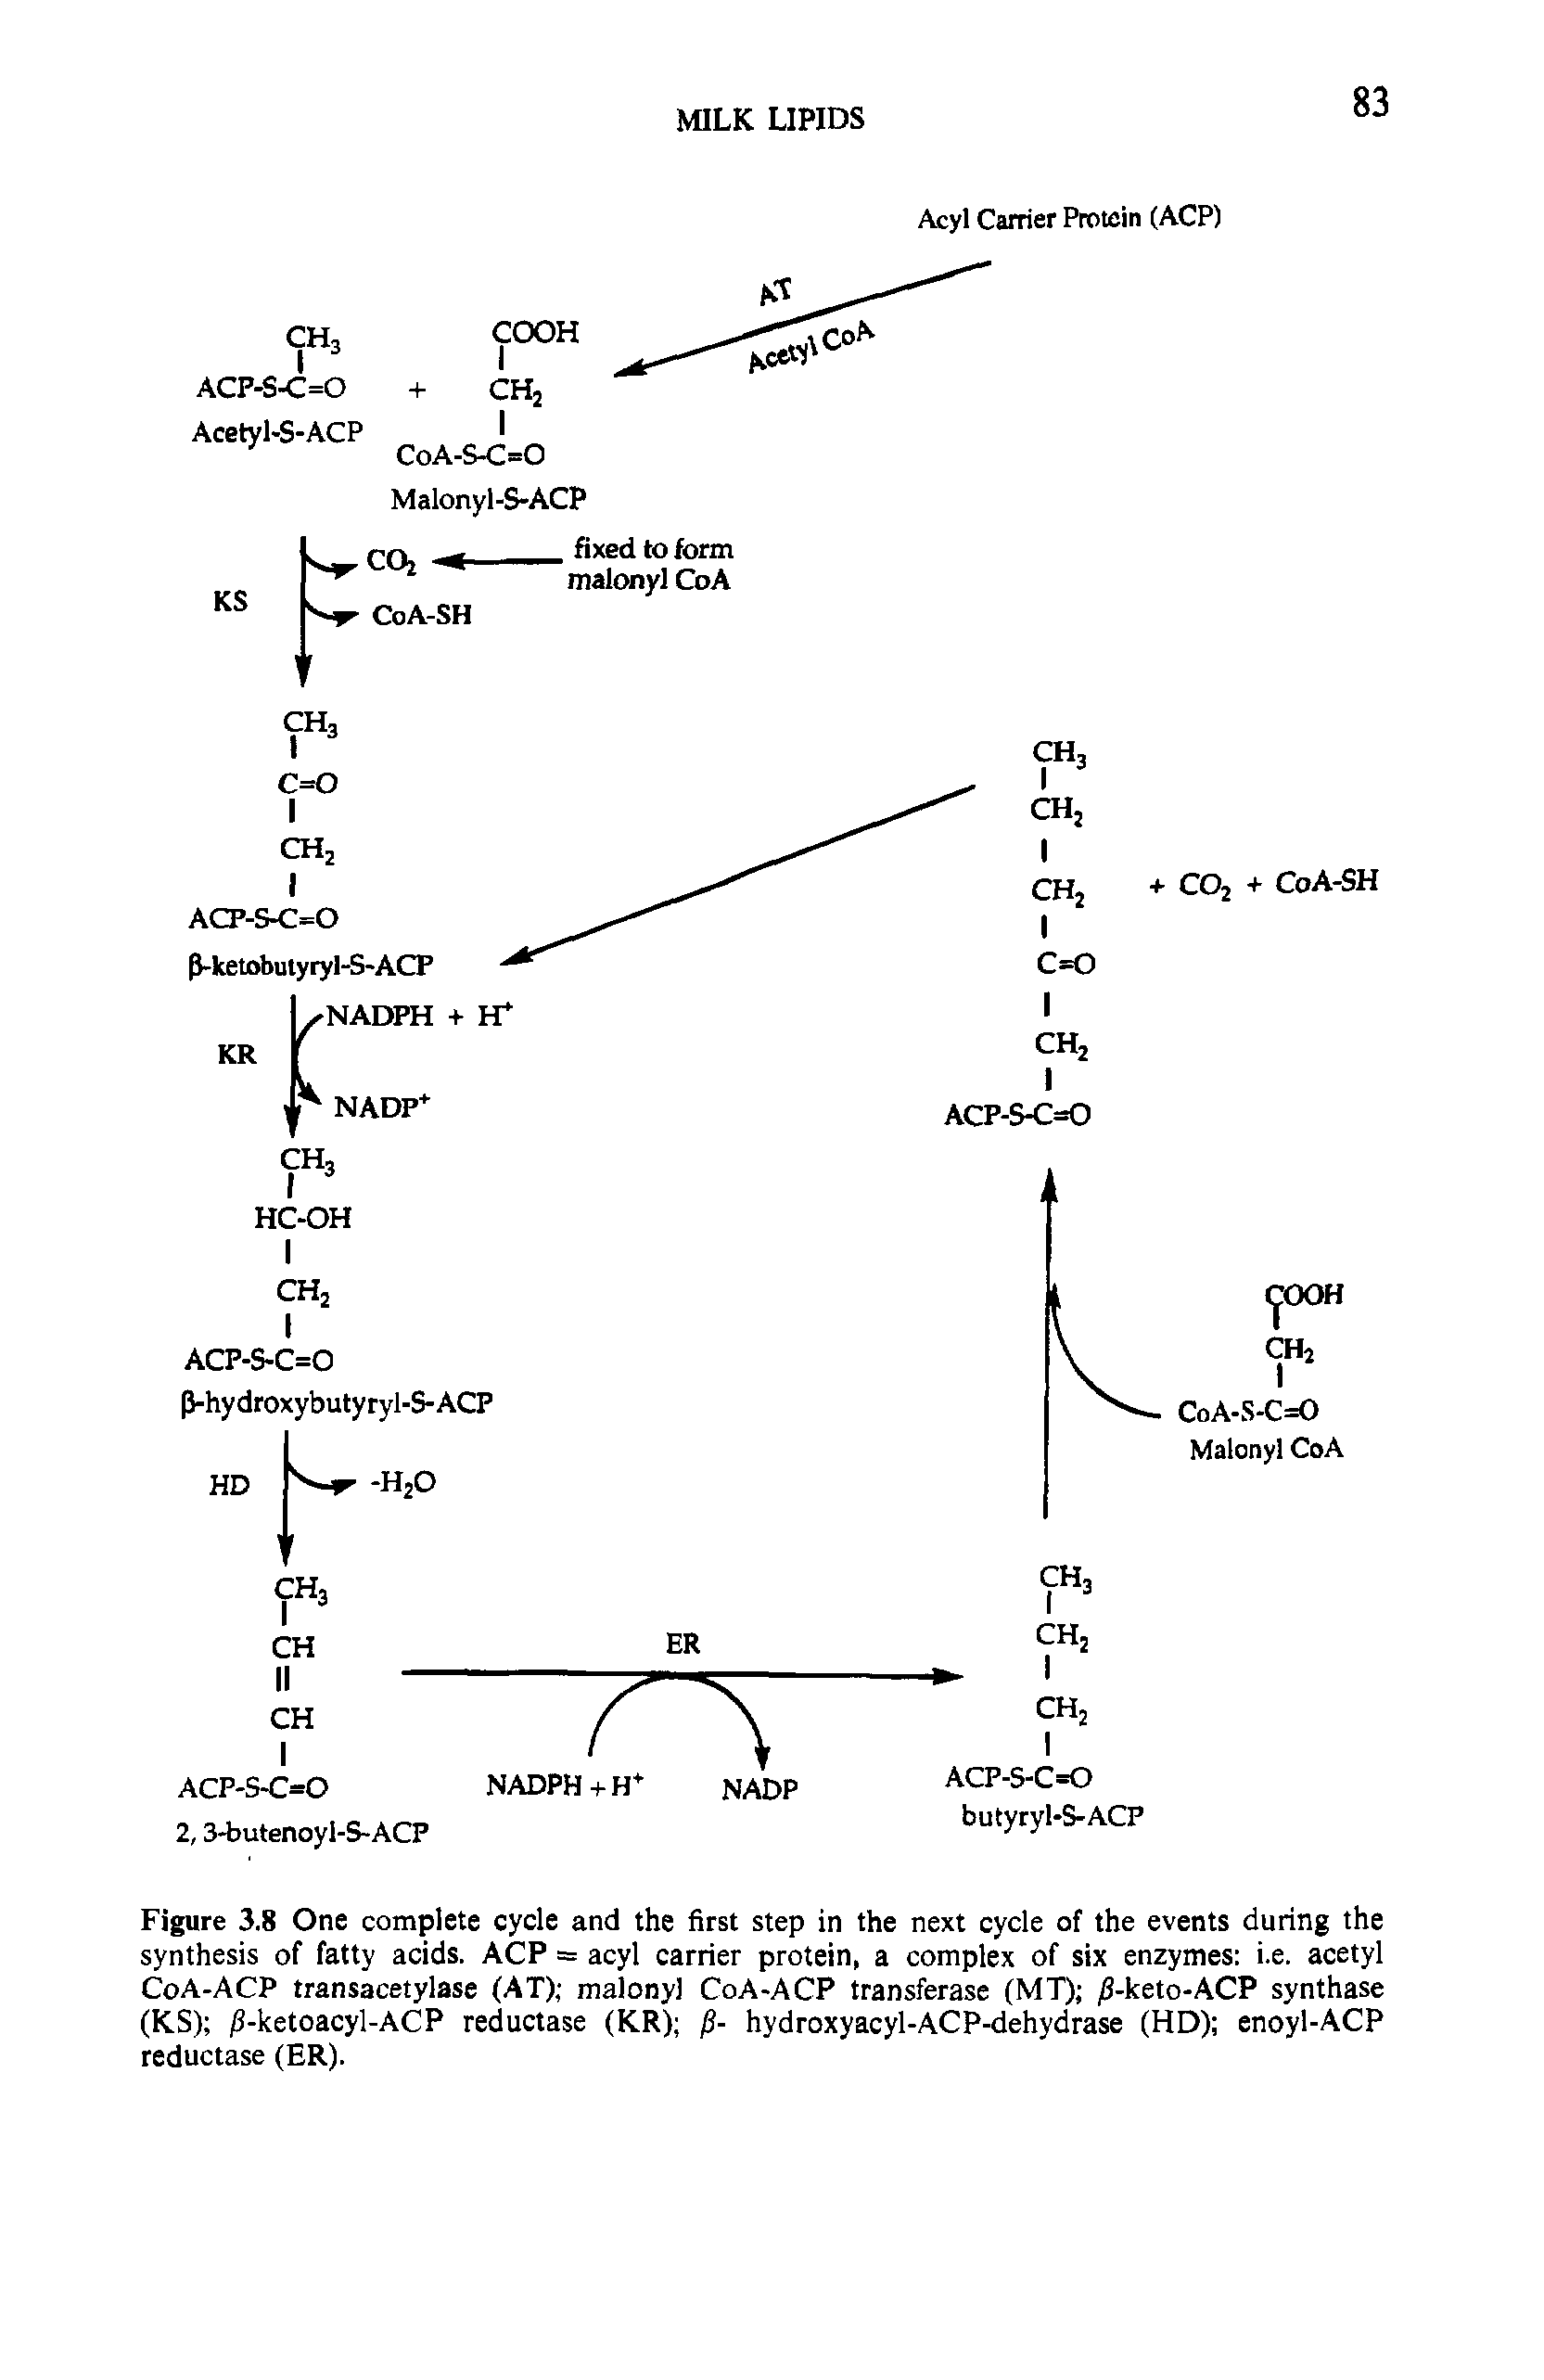 Figure 3.8 One complete cycle and the first step in the next cycle of the events during the synthesis of fatty acids. ACP = acyl carrier protein, a complex of six enzymes i.e. acetyl CoA-ACP transacetylase (AT) malonyl CoA-ACP transferase (MT) /3-keto-ACP synthase (KS) /J-ketoacyl-ACP reductase (KR) / - hydroxyacyl-ACP-dehydrase (HD) enoyl-ACP reductase (ER).